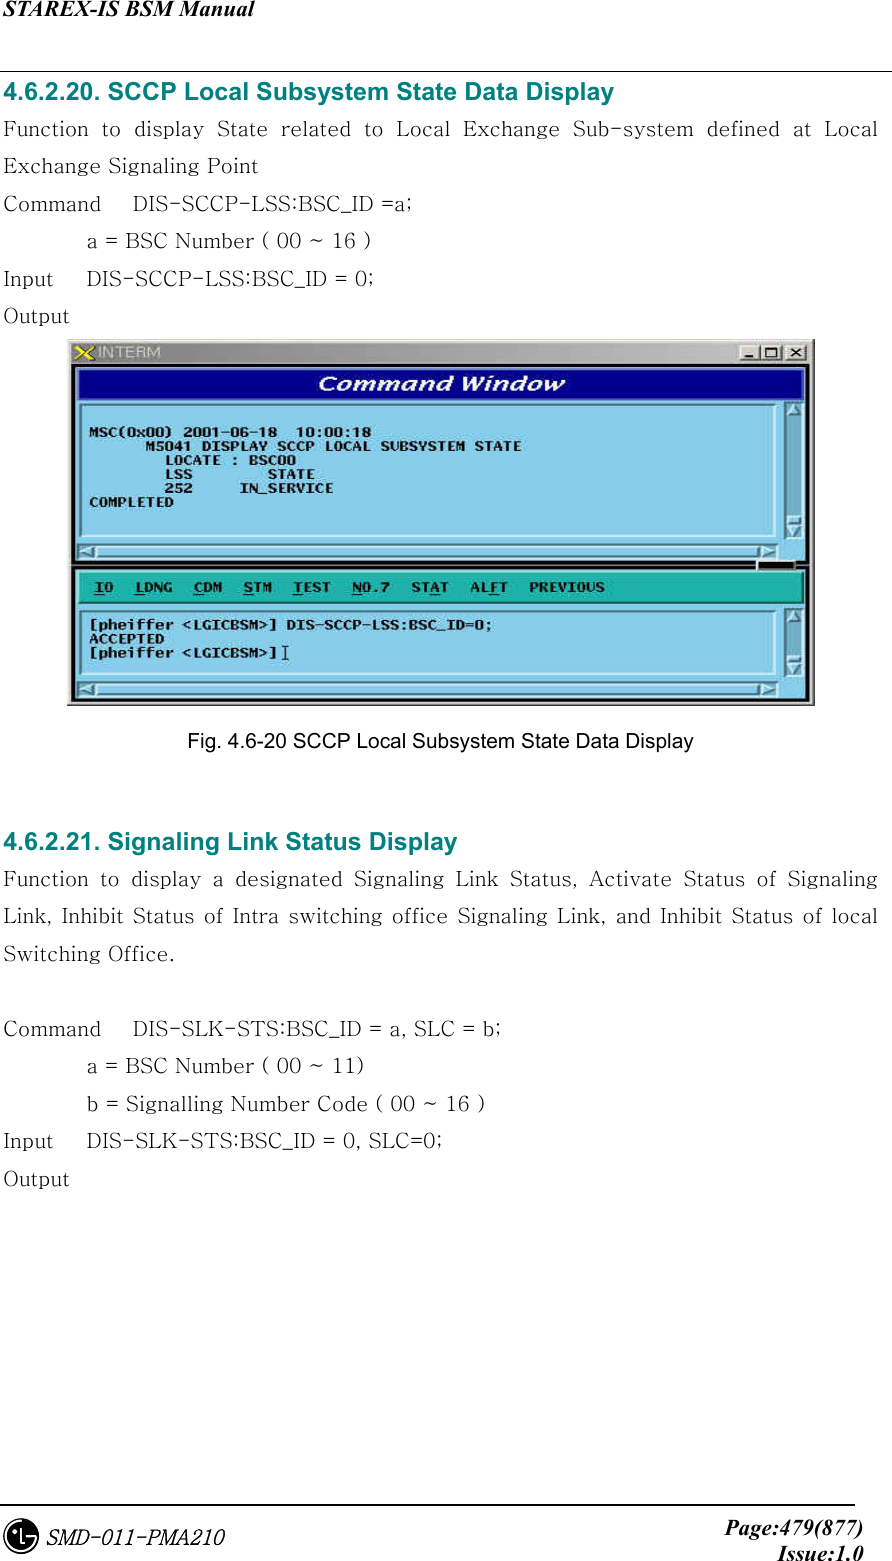 STAREX-IS BSM Manual     Page:479(877)Issue:1.0SMD-011-PMA210 4.6.2.20. SCCP Local Subsystem State Data Display Function  to  display  State  related  to  Local  Exchange  Sub-system  defined  at  Local Exchange Signaling Point Command   DIS-SCCP-LSS:BSC_ID =a;    a = BSC Number ( 00 ~ 16 ) Input    DIS-SCCP-LSS:BSC_ID = 0; Output  Fig. 4.6-20 SCCP Local Subsystem State Data Display  4.6.2.21. Signaling Link Status Display Function  to  display  a  designated  Signaling  Link  Status,  Activate  Status  of  Signaling Link, Inhibit Status of Intra switching office Signaling Link, and Inhibit Status of local Switching Office.  Command   DIS-SLK-STS:BSC_ID = a, SLC = b;   a = BSC Number ( 00 ~ 11)   b = Signalling Number Code ( 00 ~ 16 )   Input    DIS-SLK-STS:BSC_ID = 0, SLC=0; Output 